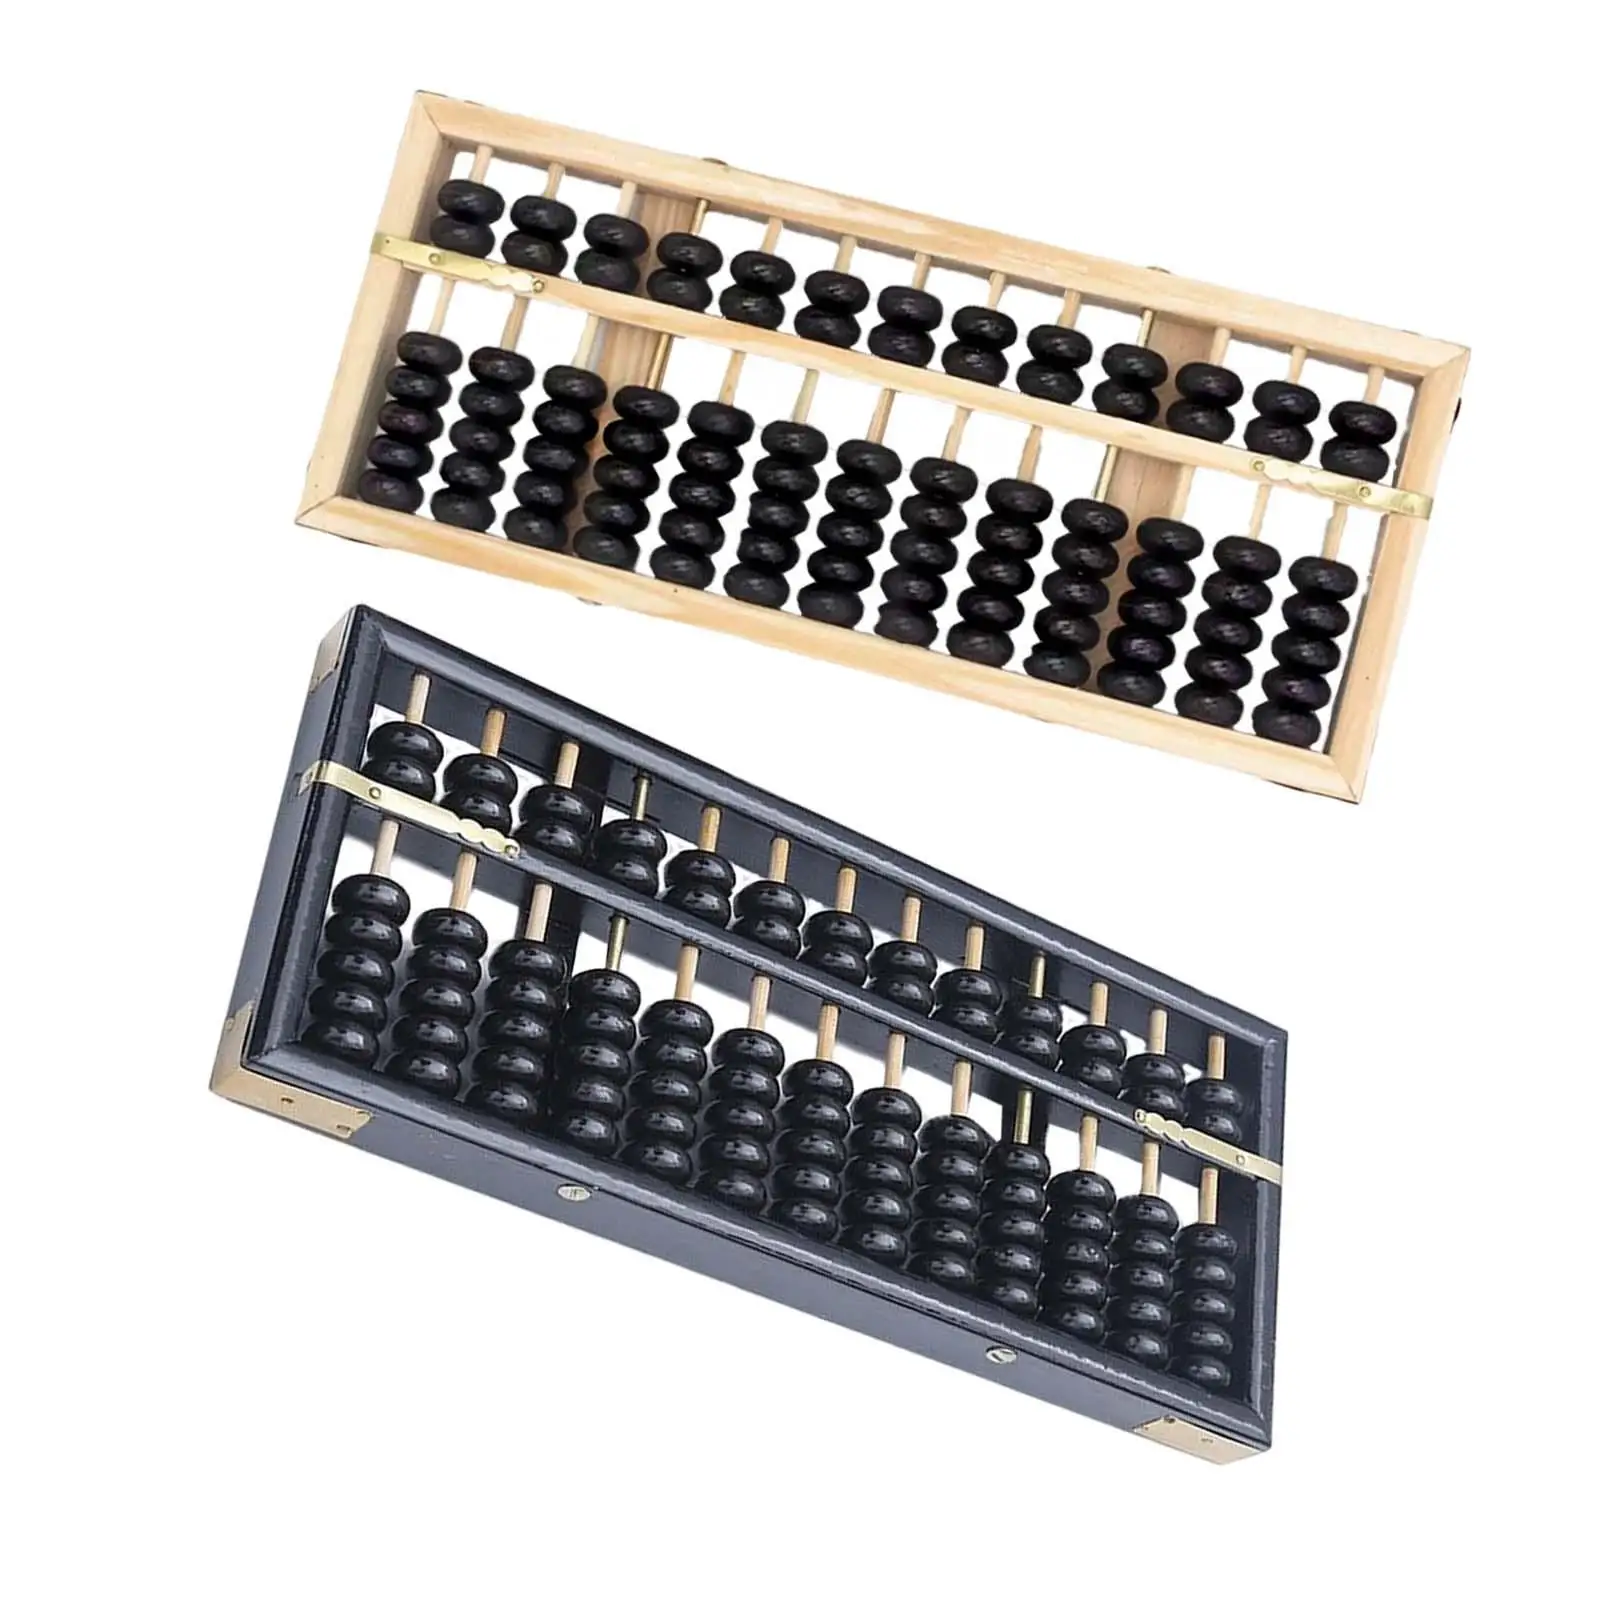 13 Rods Vintage Style Wooden Abacus Math Toys Professional Educational Tools Calculator Soroban Counting Tool for Adults Kids